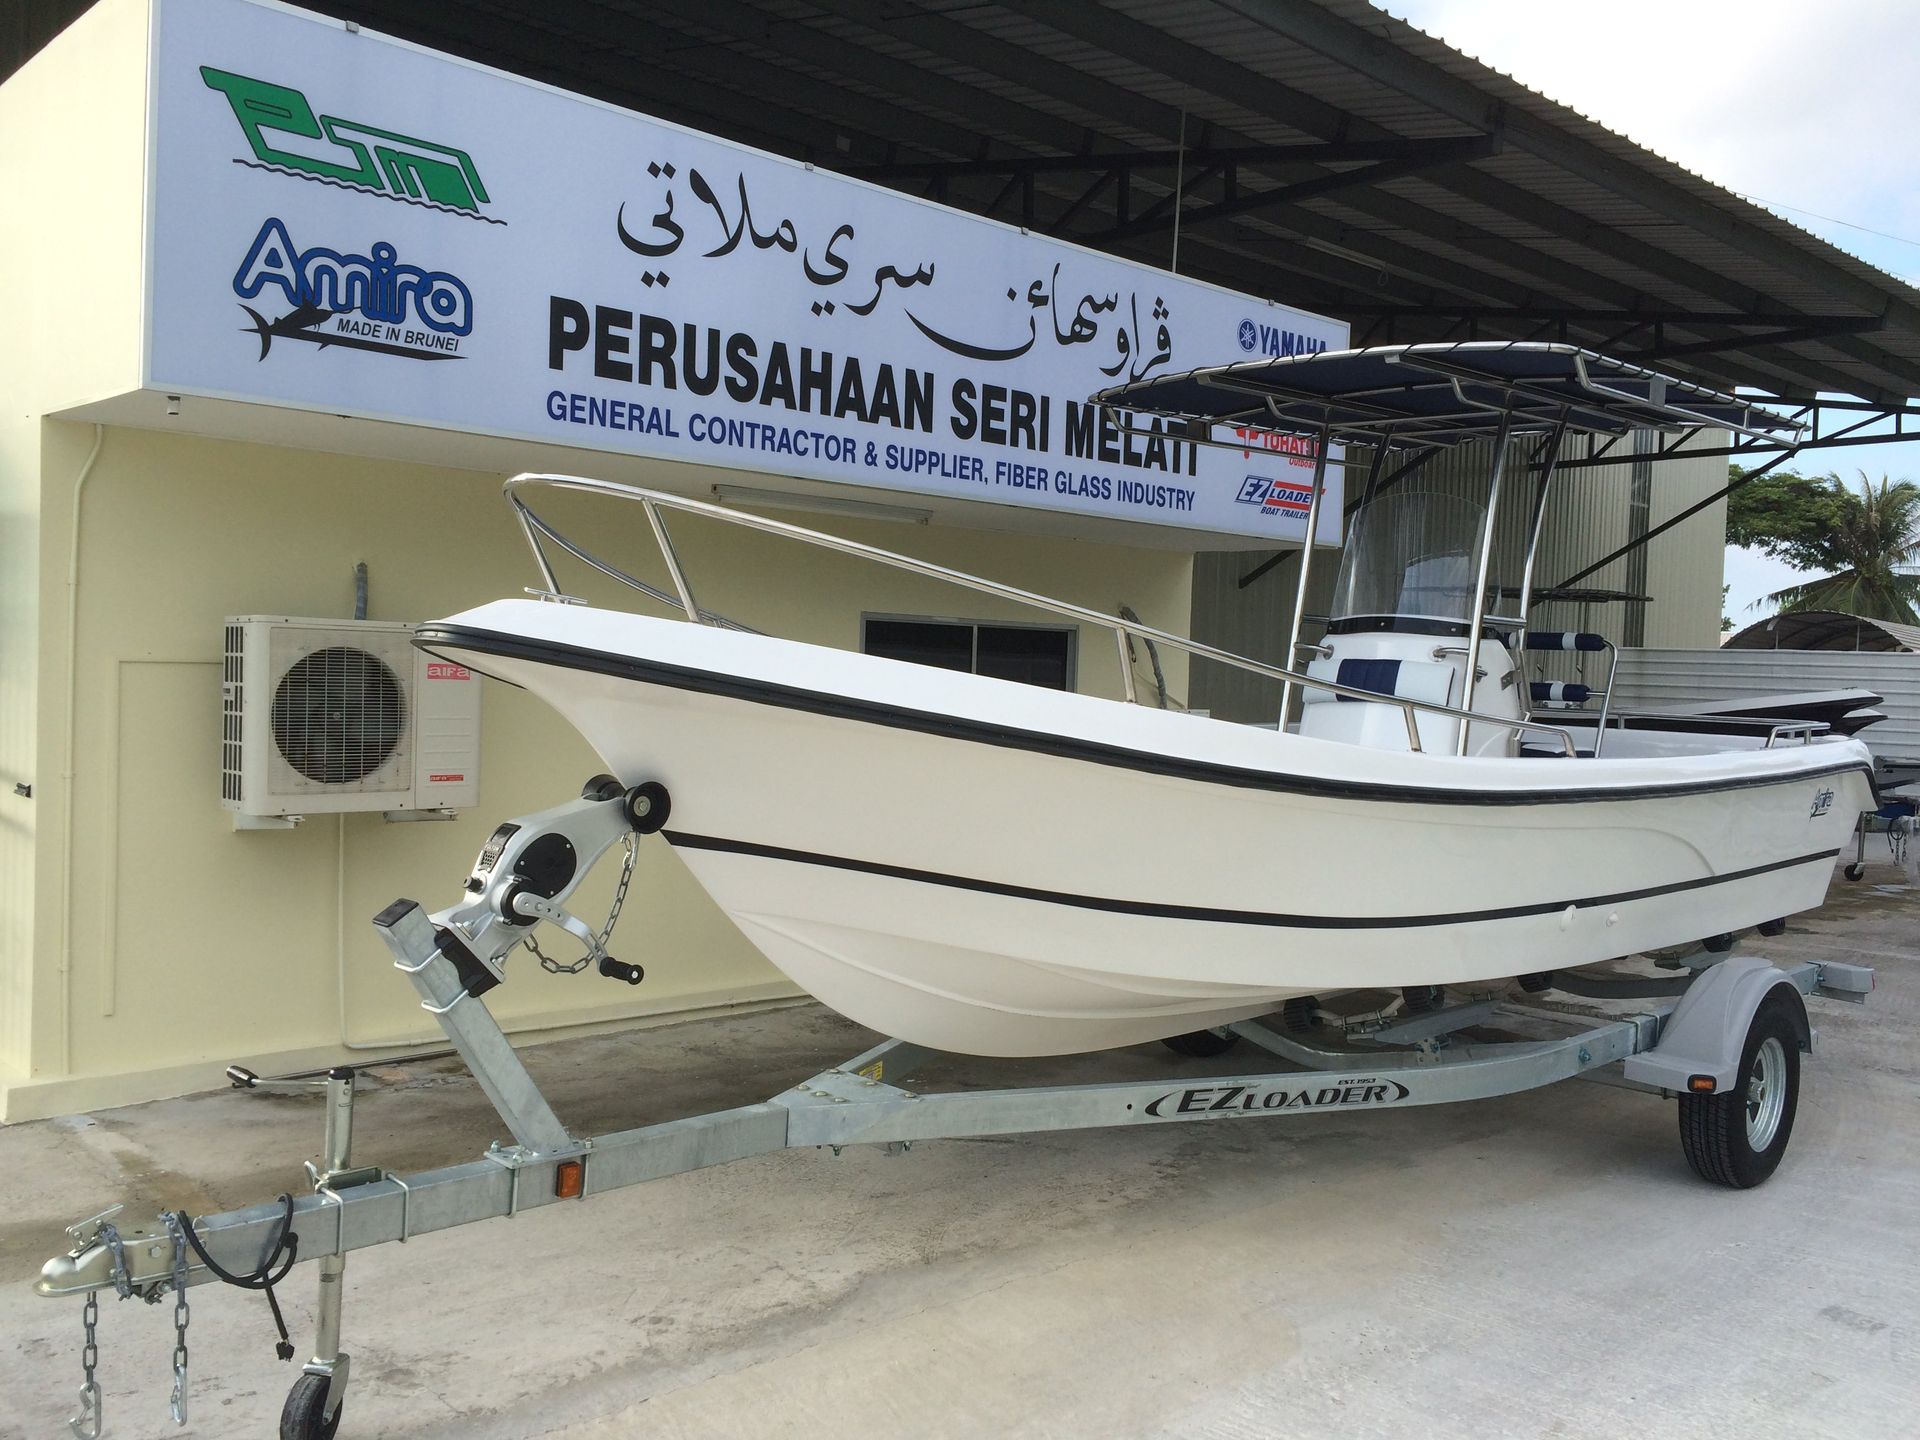 Amira boat 21feet complete with Ez loader trailer